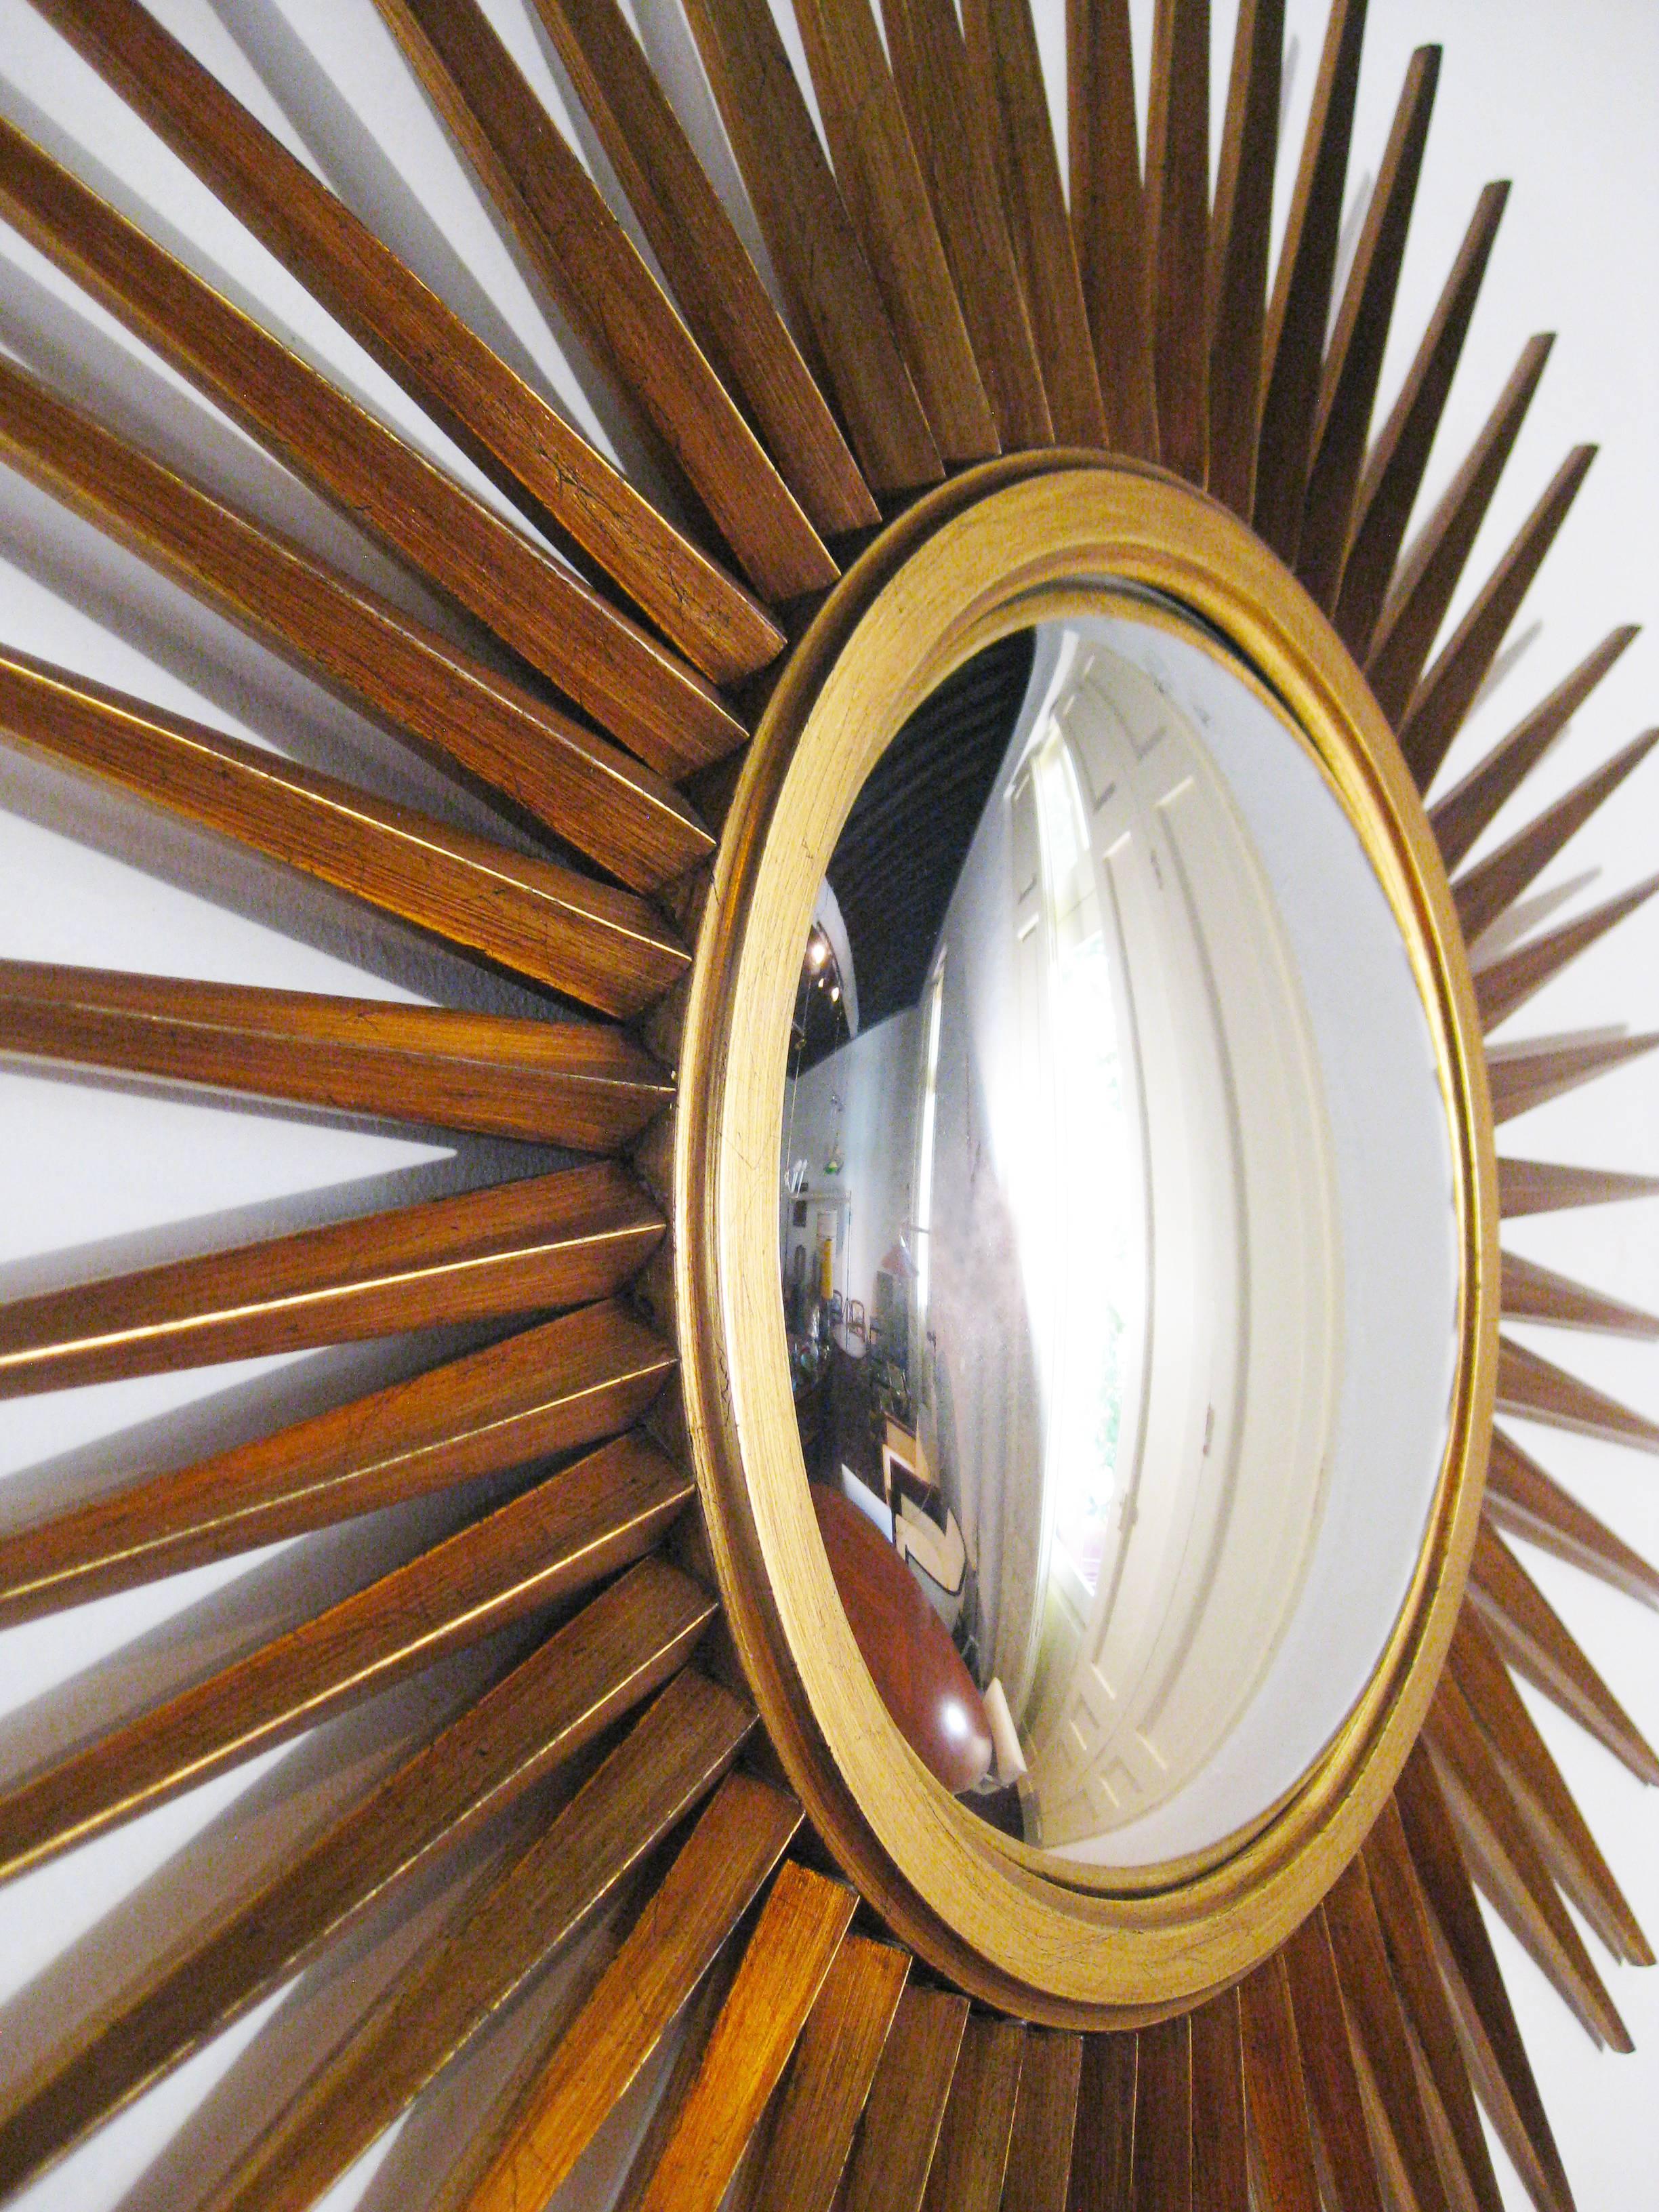 This spectacular mirror has a formidable convex center surrounded by intricate rays. Designed by Pani in the 1950s, it is gilded in gold leaf and without blemish, all original.

Younger brother of the celebrated architect Mario Pani, Arturo Pani